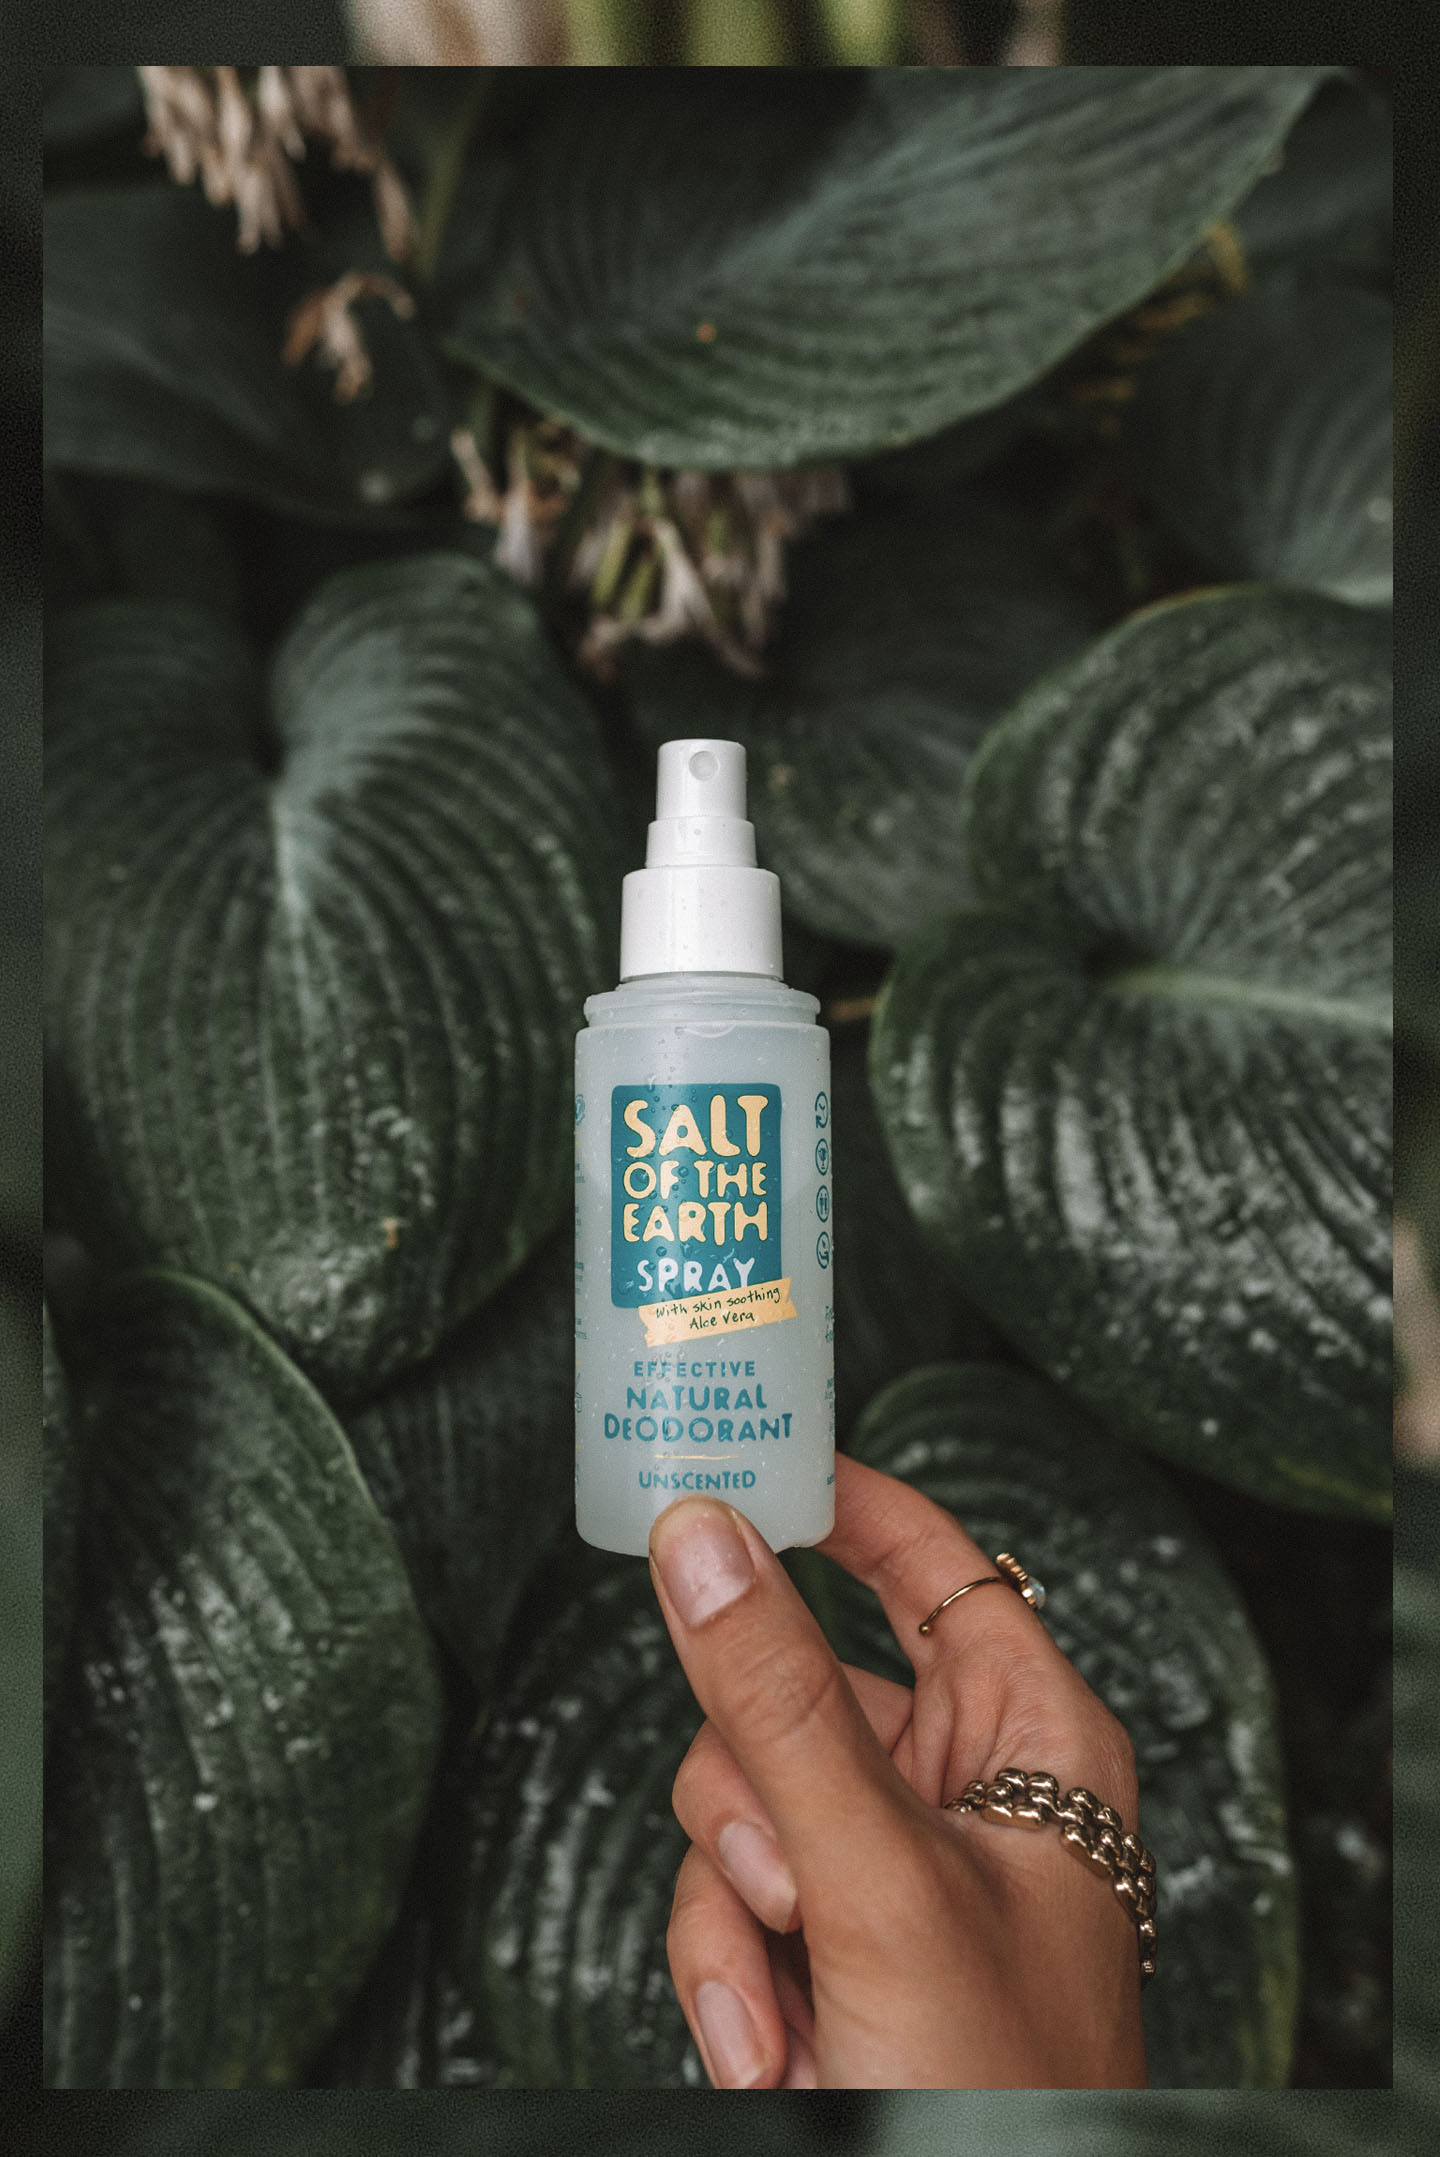 Salt of the Earth Natural Spray unscented